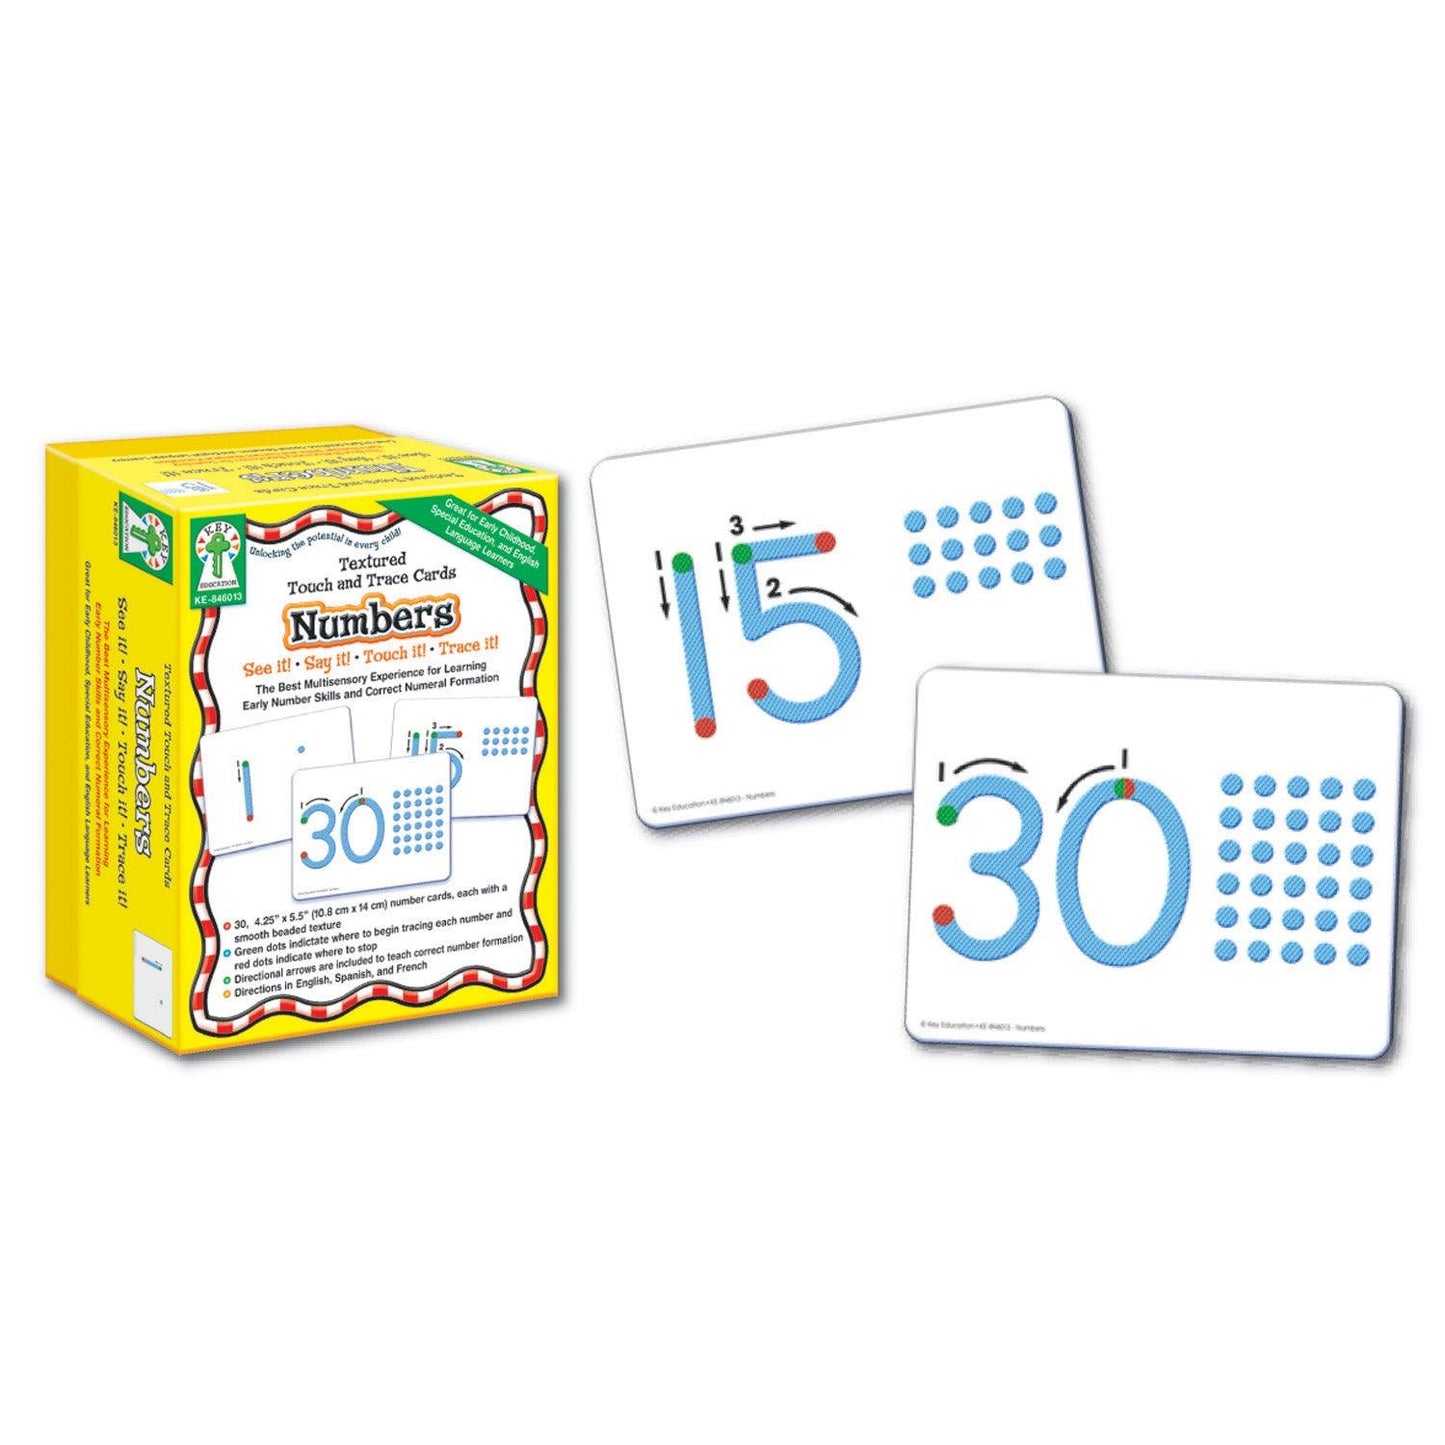 Textured Touch and Trace Cards: Numbers, Grade PK-3 - Loomini